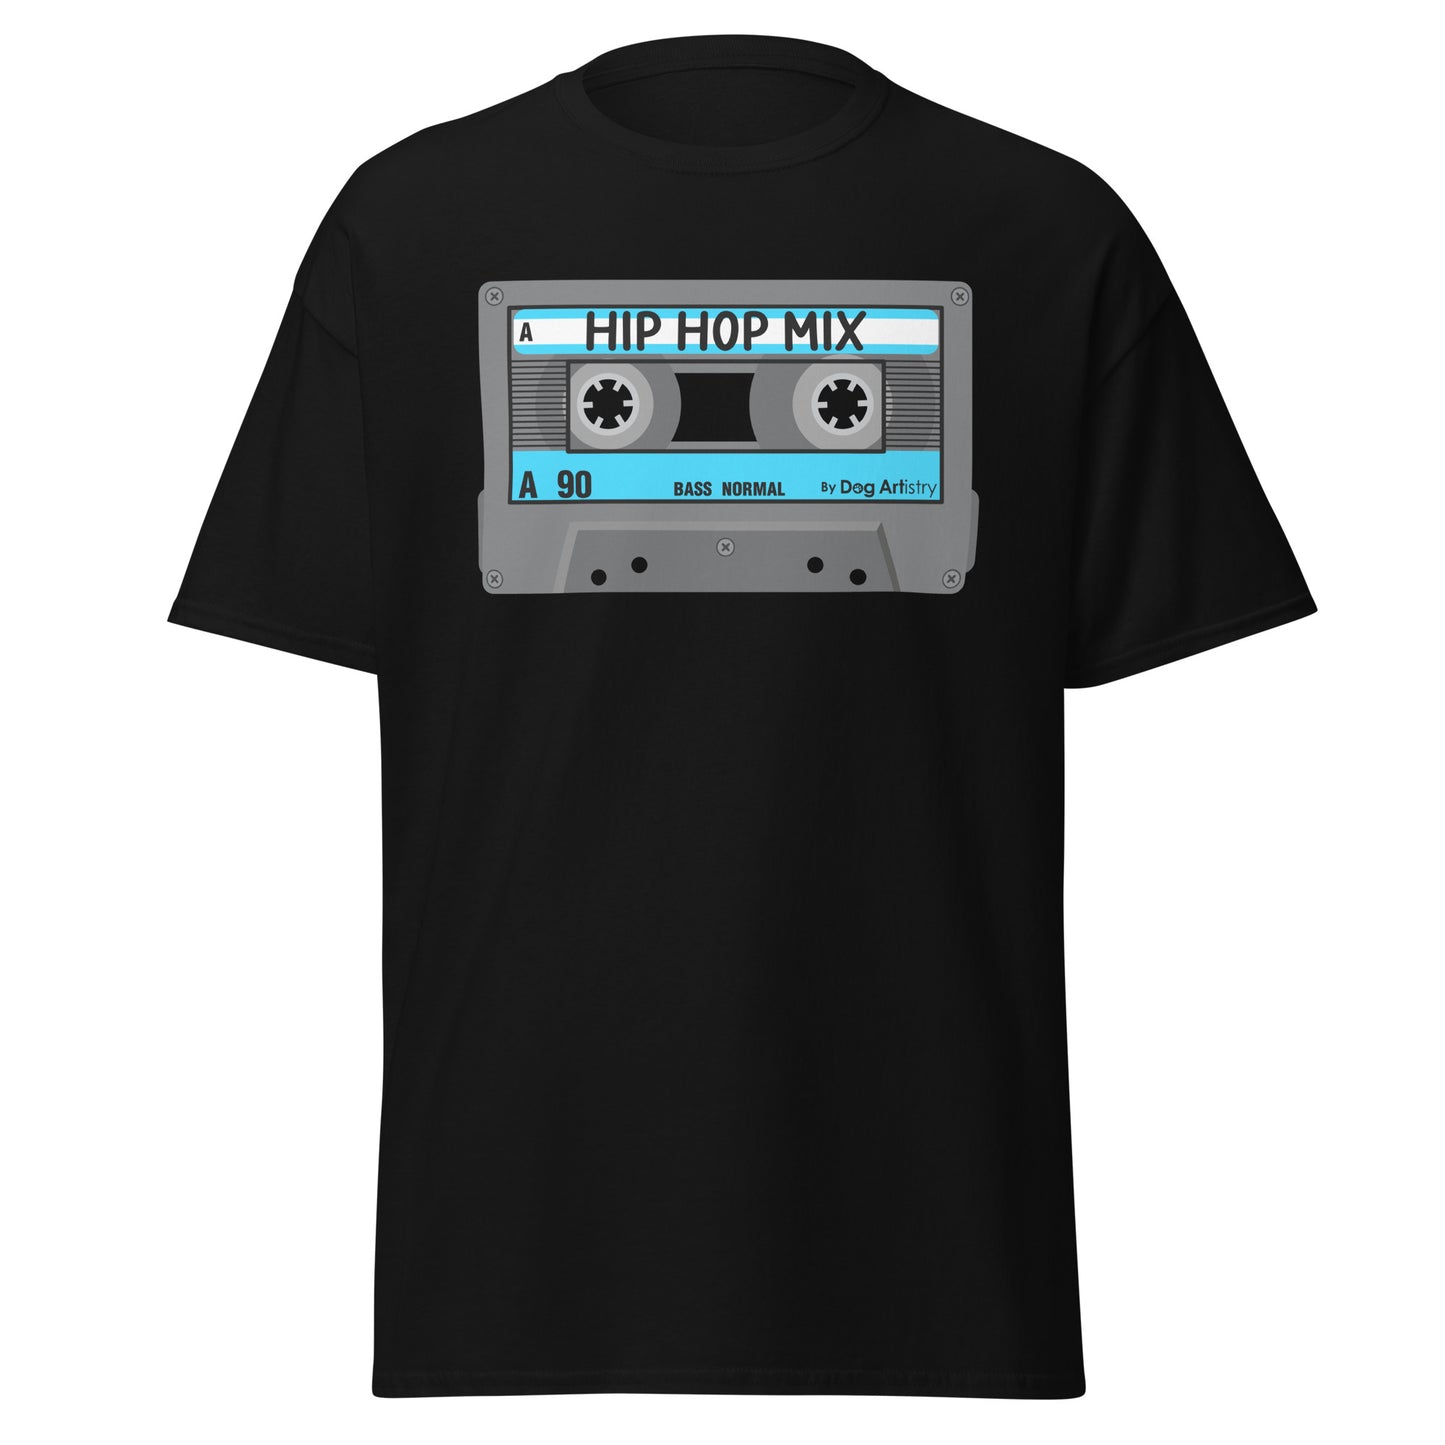 Hip Hop Mix Cassette Tape Men's classic tee by Dog Artistry